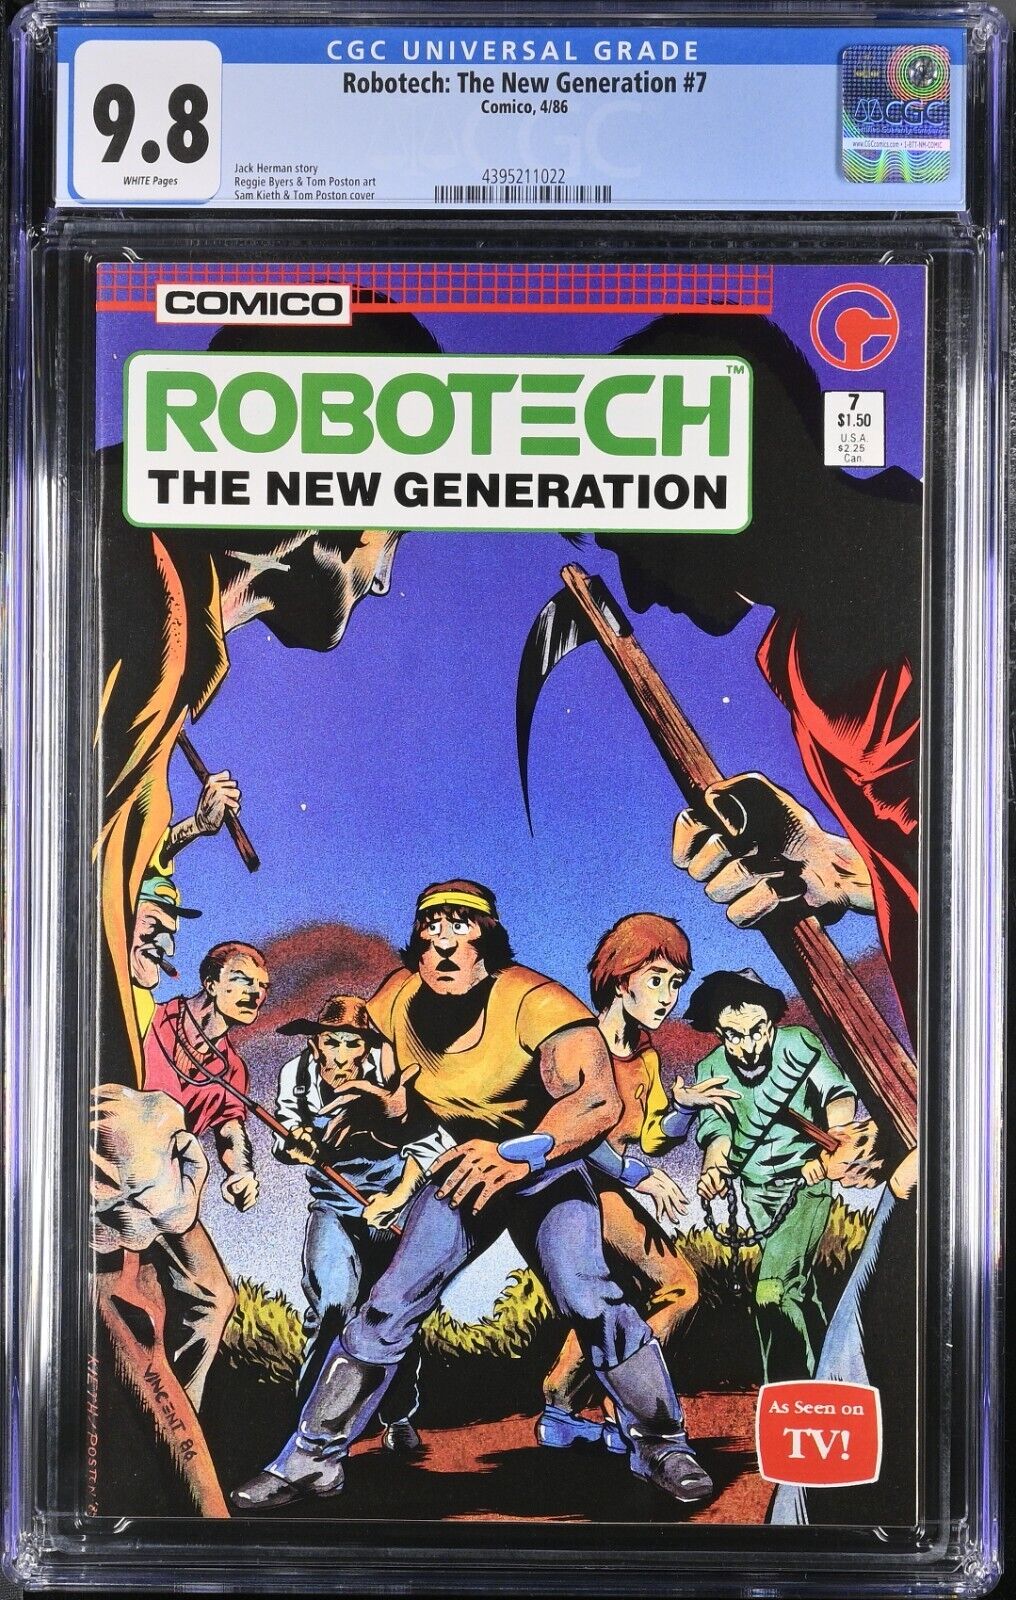 ROBOTECH: THE NEW GENERATION #7 - CGC 9.8 - WP - NM/MT